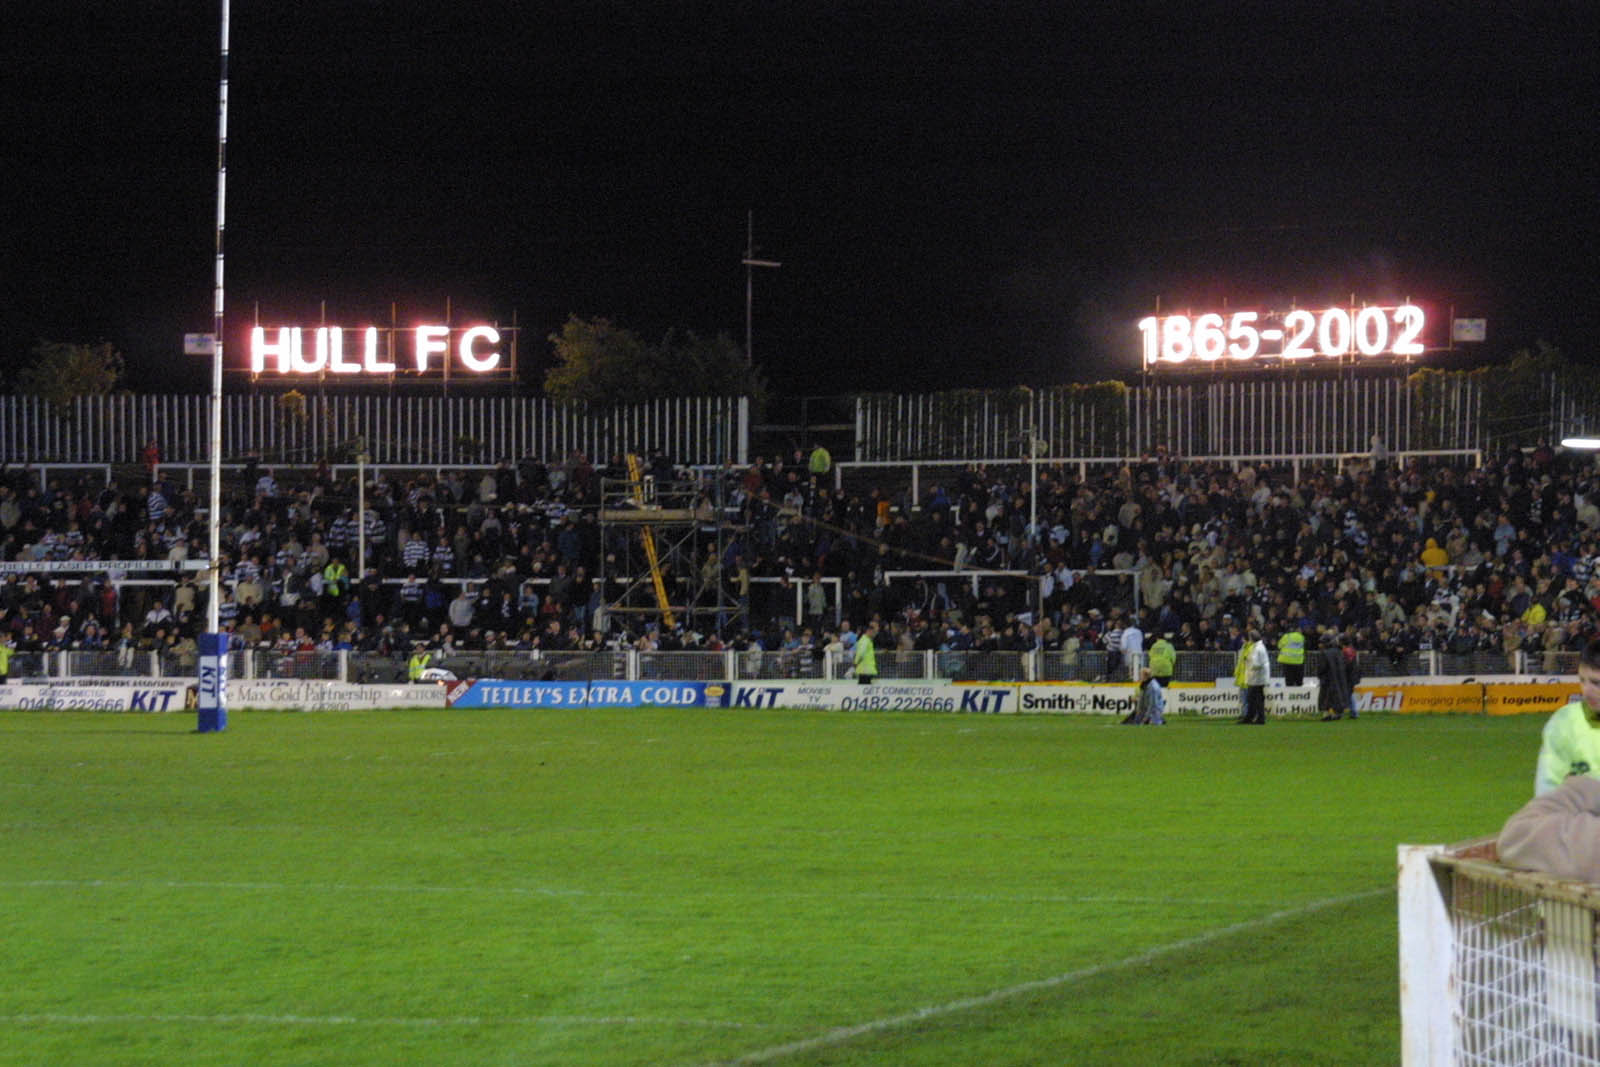 Throwback: When Hull FC said farewell to The Boulevard